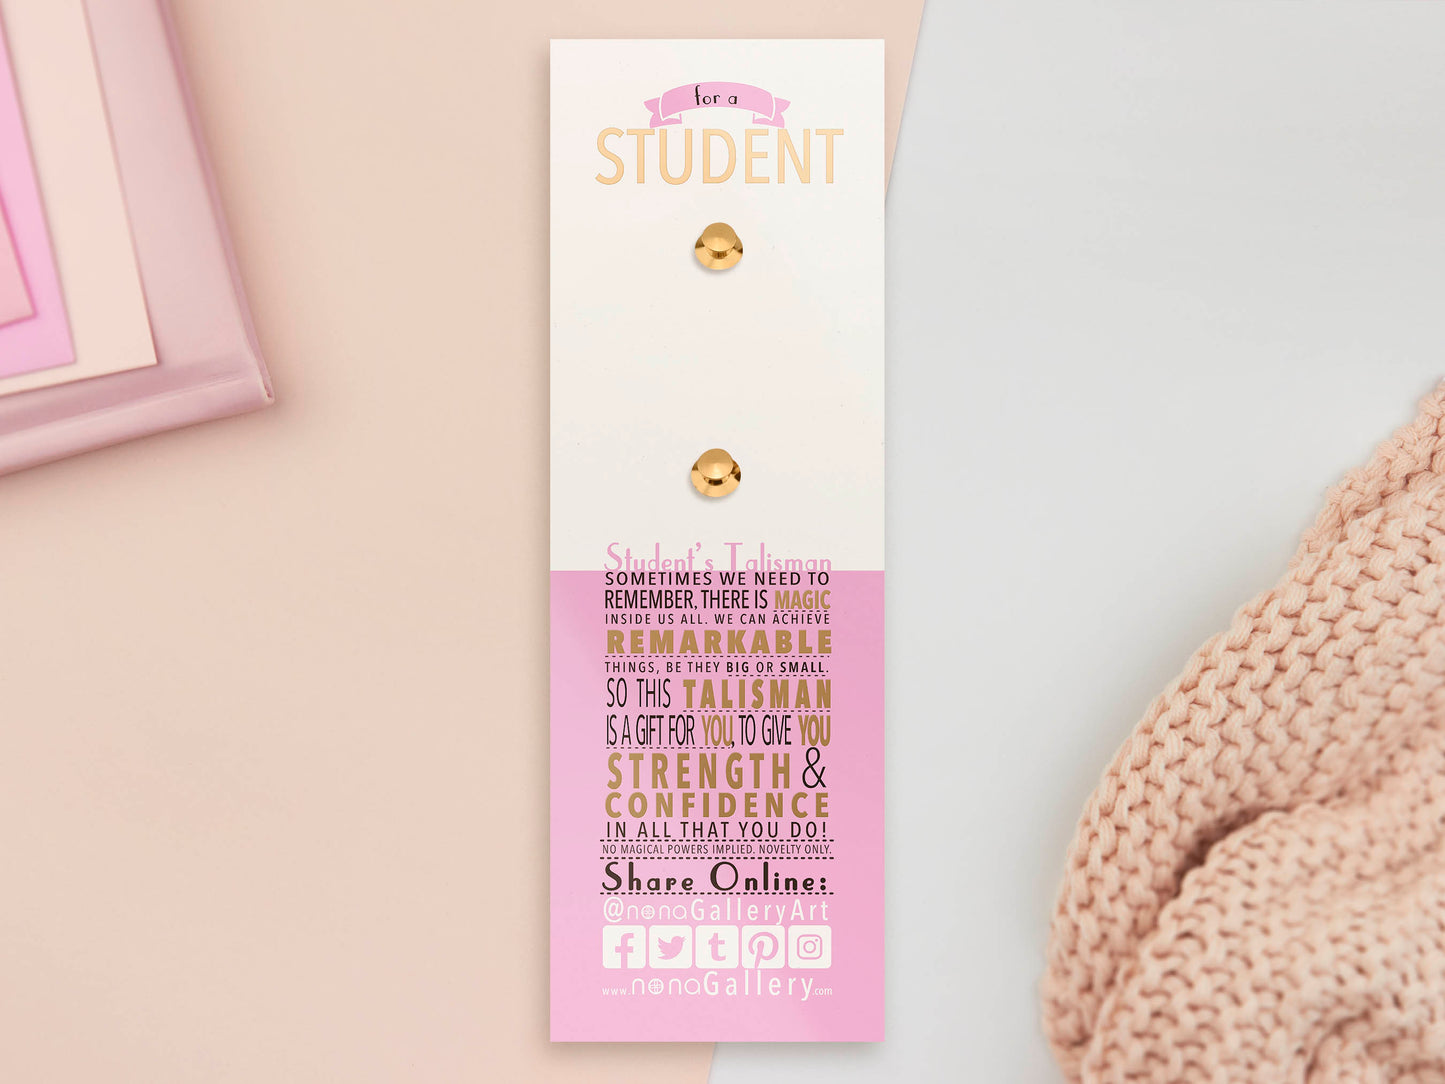 The back of the long white and pink backing card with gold accents. The backing card details the symbolism of the different design elements of the Student's Talisman pin. Also shown is the two gold locking pin backs attached to the card.